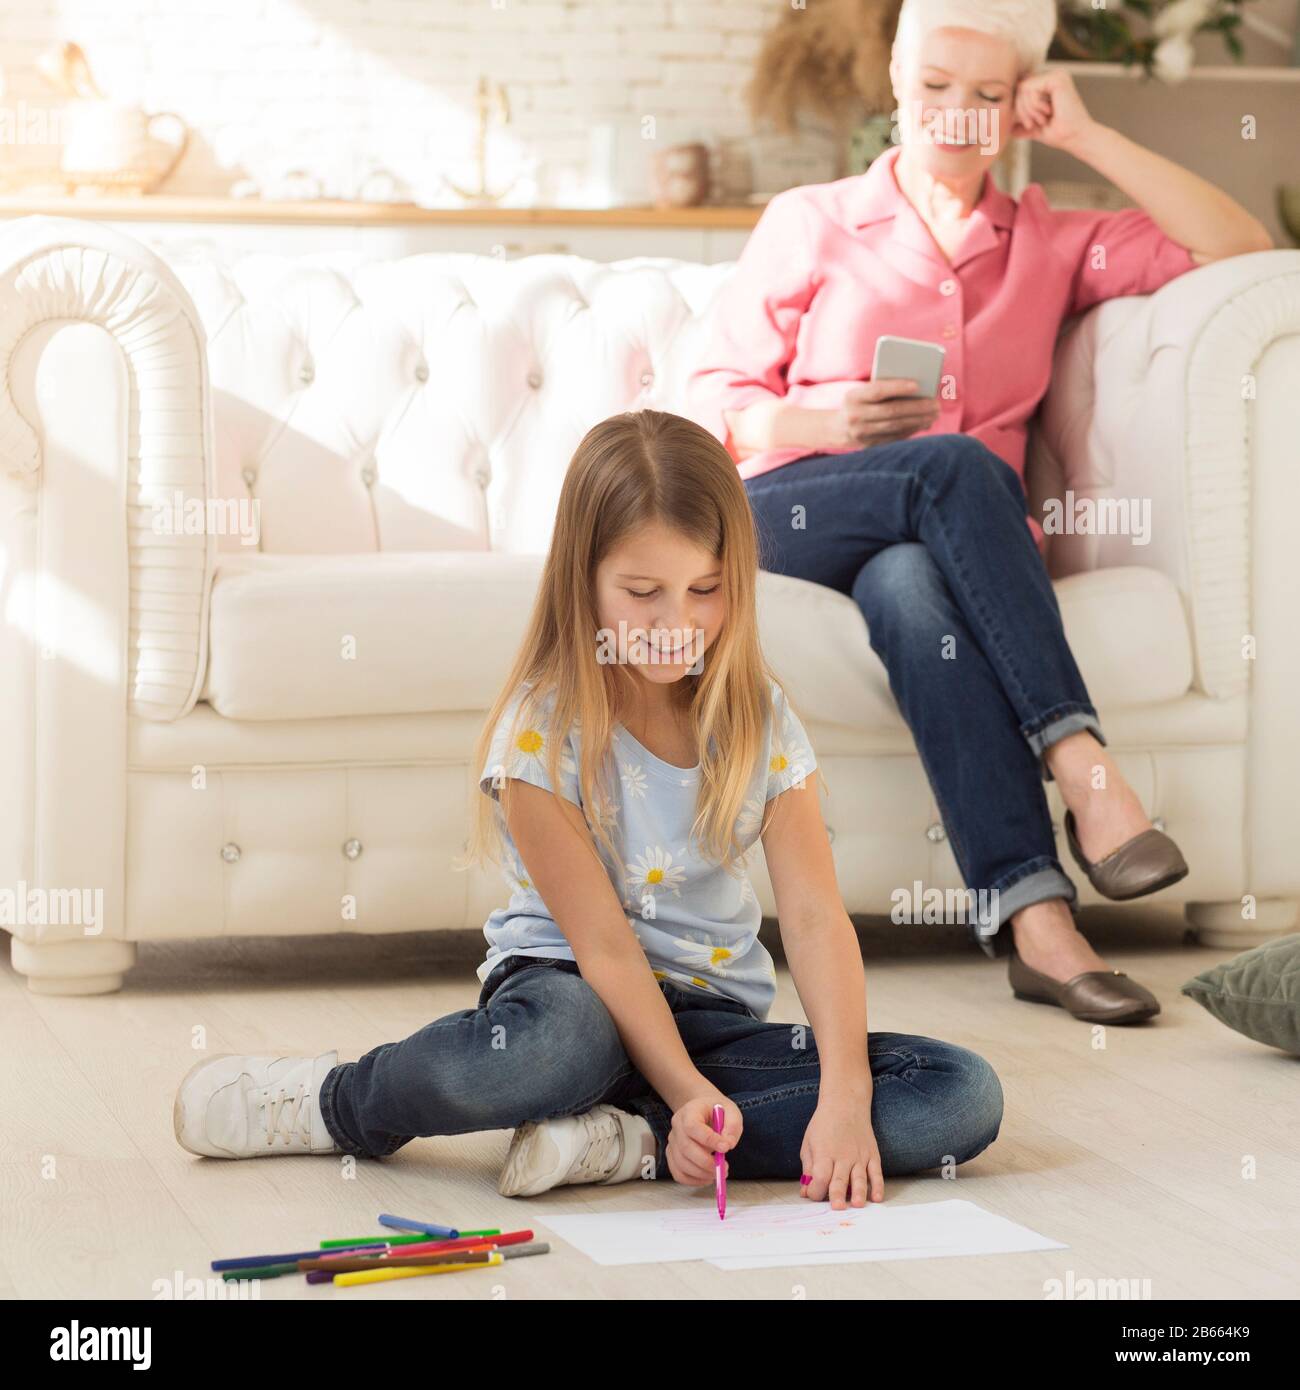 Little girl drawing on floor next to her granny Stock Photo